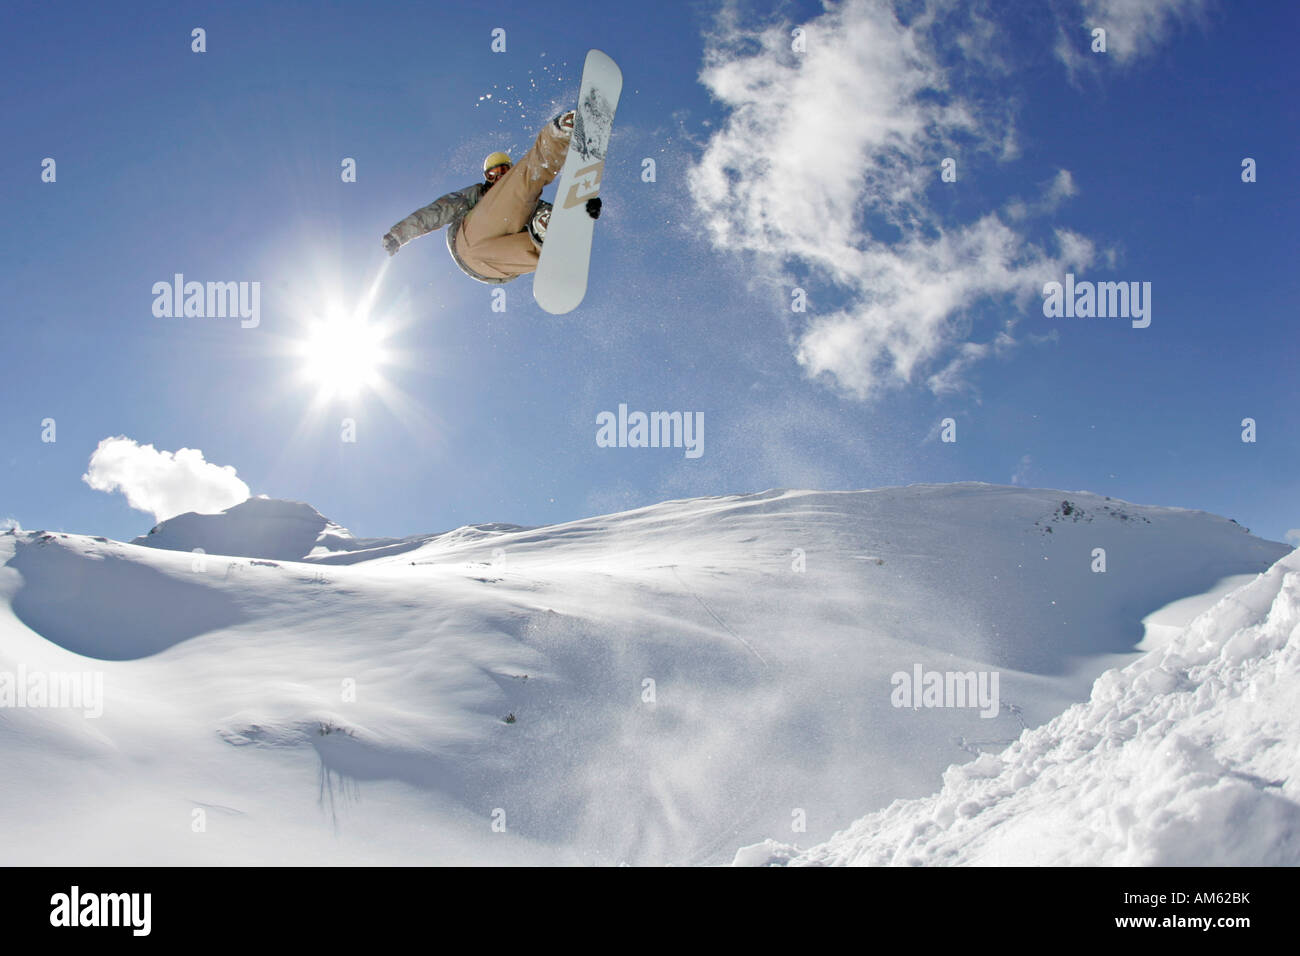 Snowboarder jumping out of Quarterpipe, Zauchensee, Austria Stock Photo